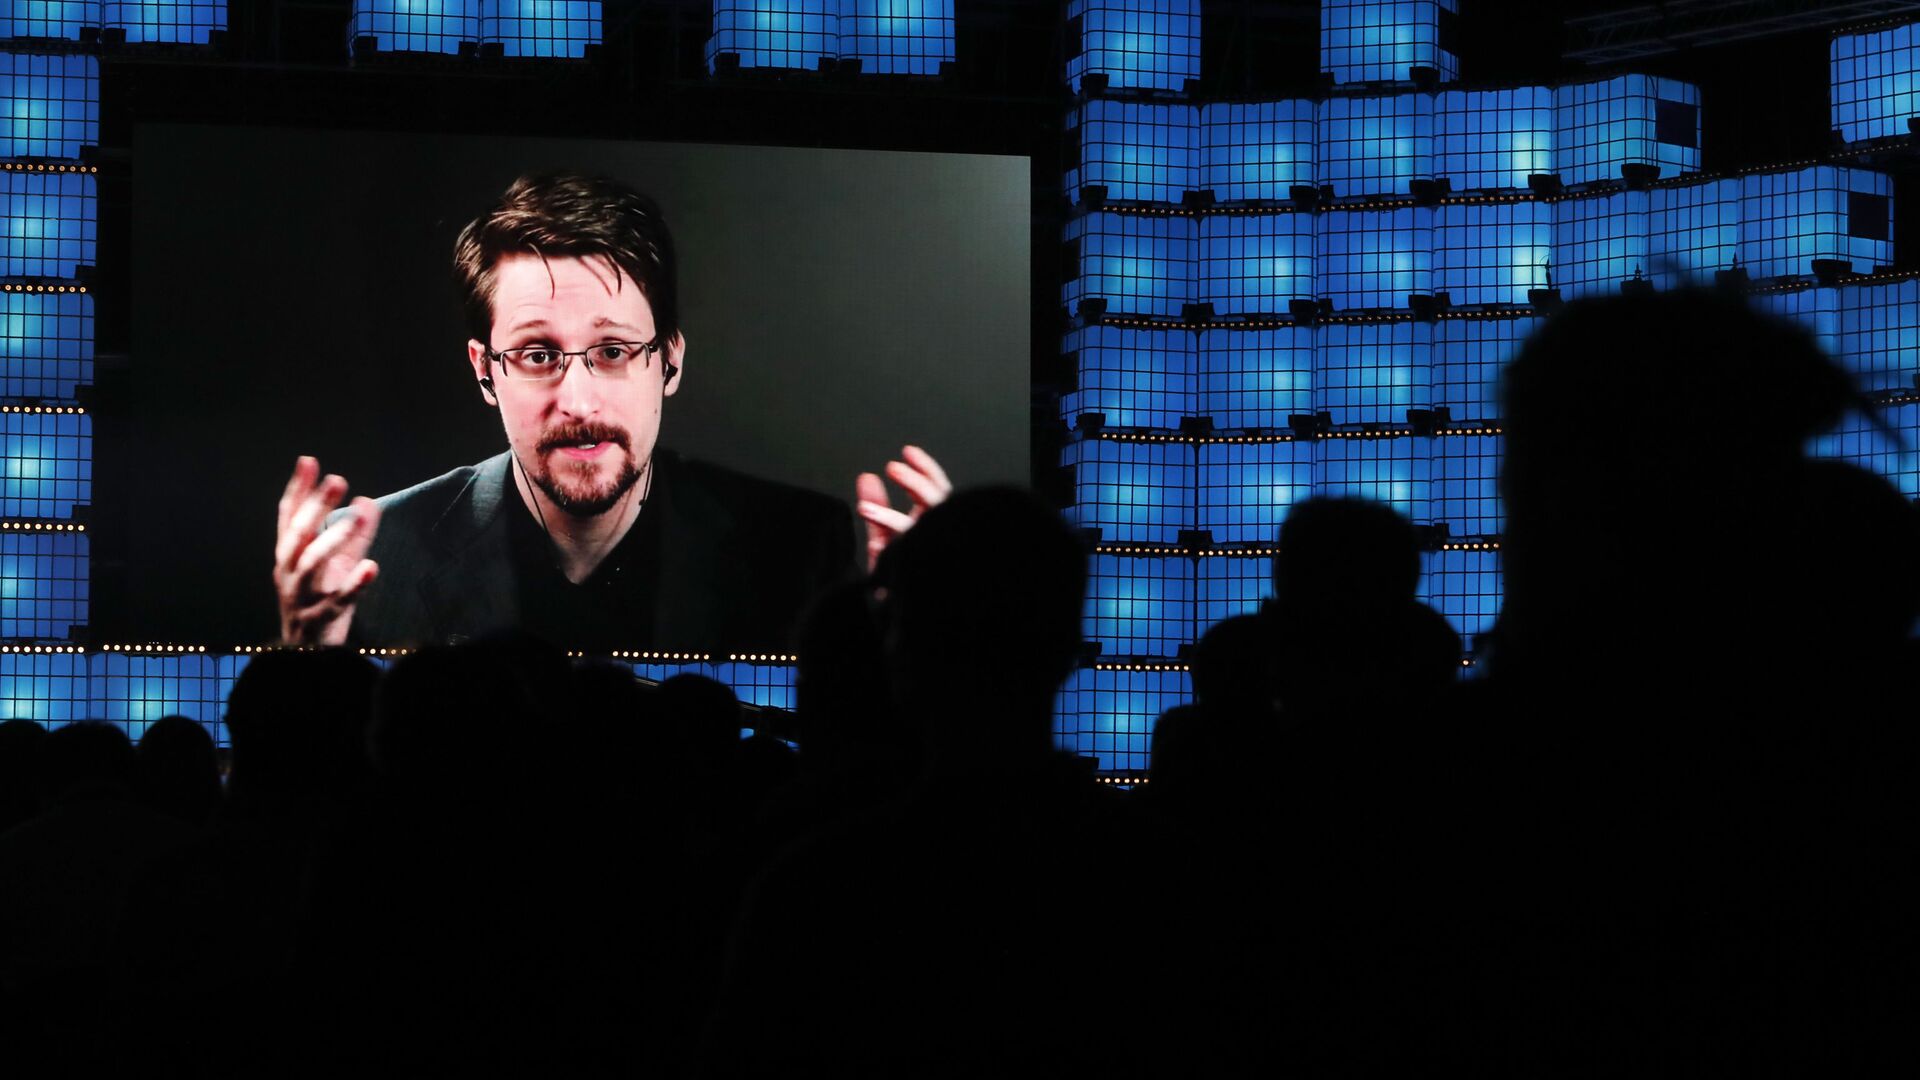 Former U.S. National Security Agency contractor Edward Snowden addresses attendees through video link at the Web Summit technology conference in Lisbon, Monday, Nov. 4, 2019 - Sputnik International, 1920, 27.06.2021